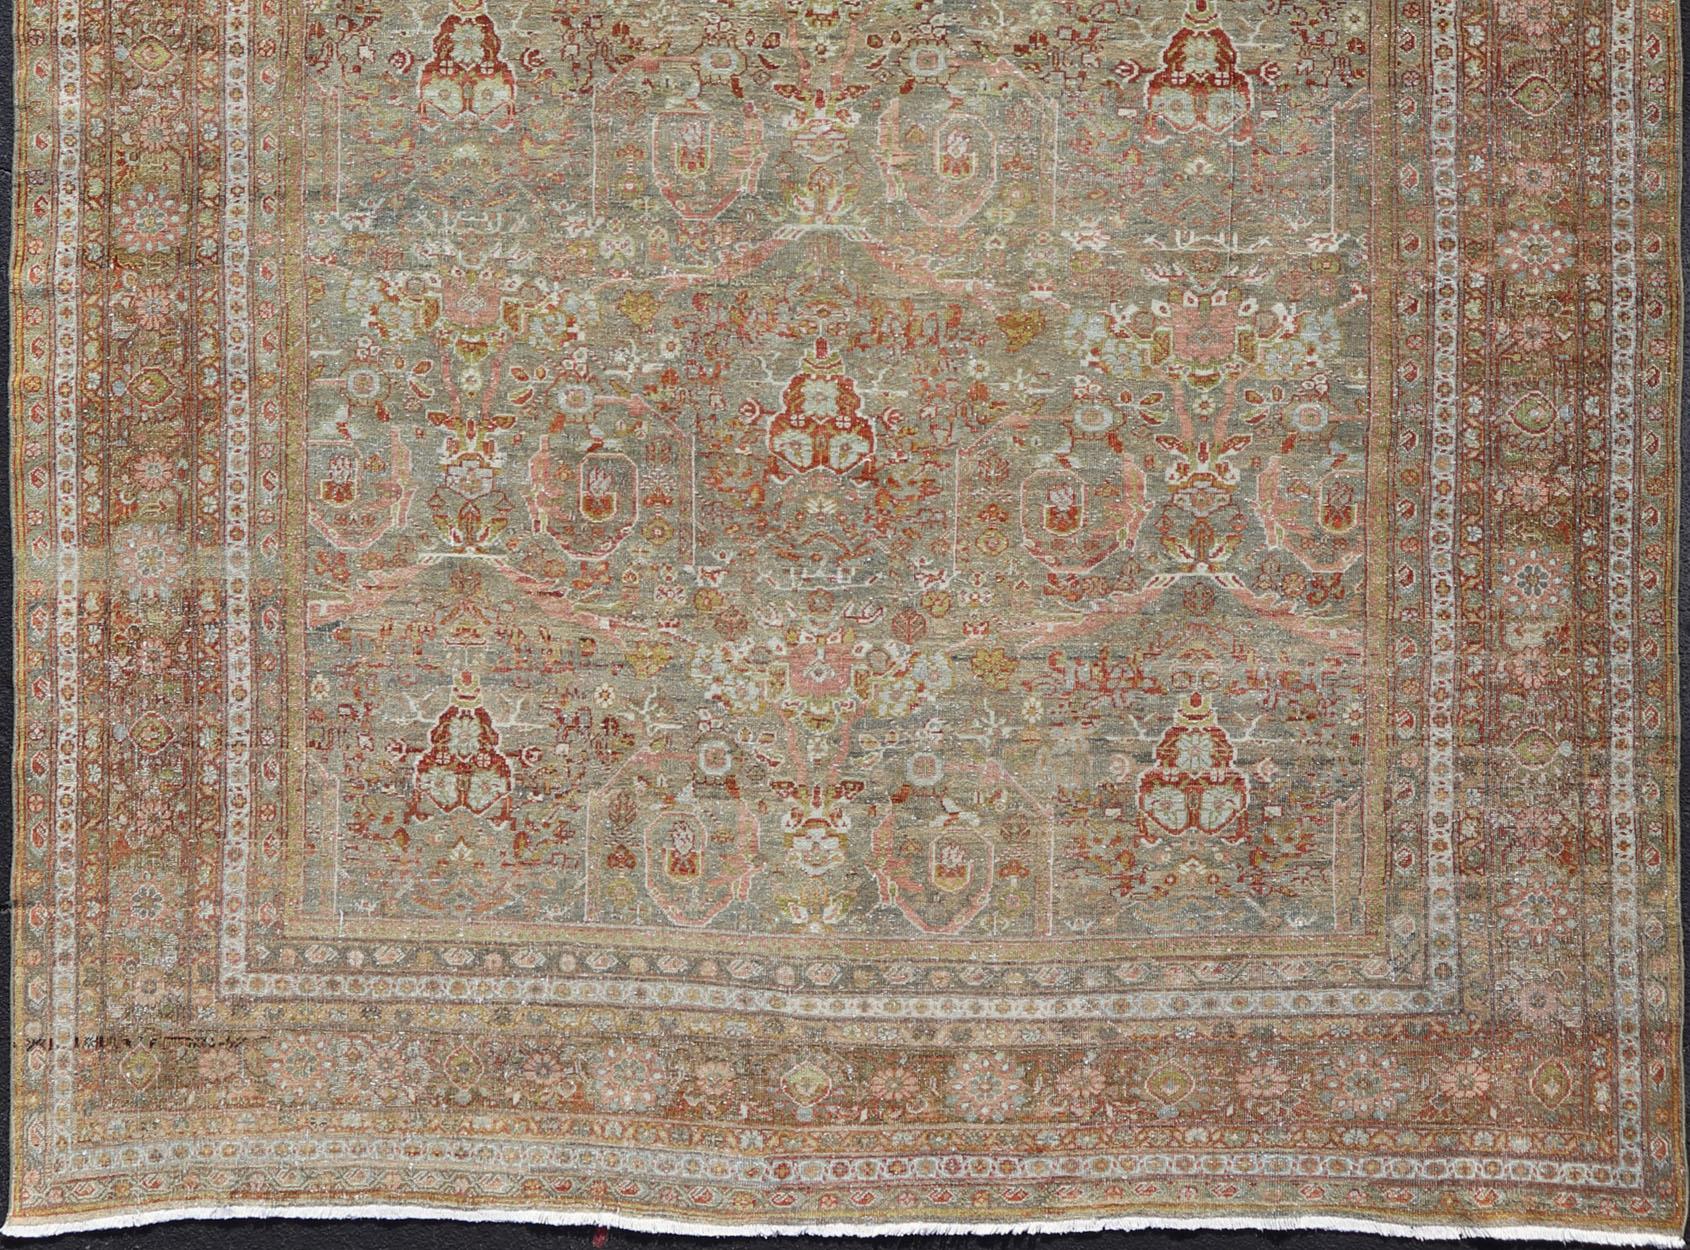 Beautiful Sultanabad antique rug from Persia with all-over geometric design, rug DAN-1701, country of origin / type: Iran / Mahal, circa 1910

Measures: 10'7 x 16'4

This beautiful distressed antique Persian Sultanabad rug features an all-over